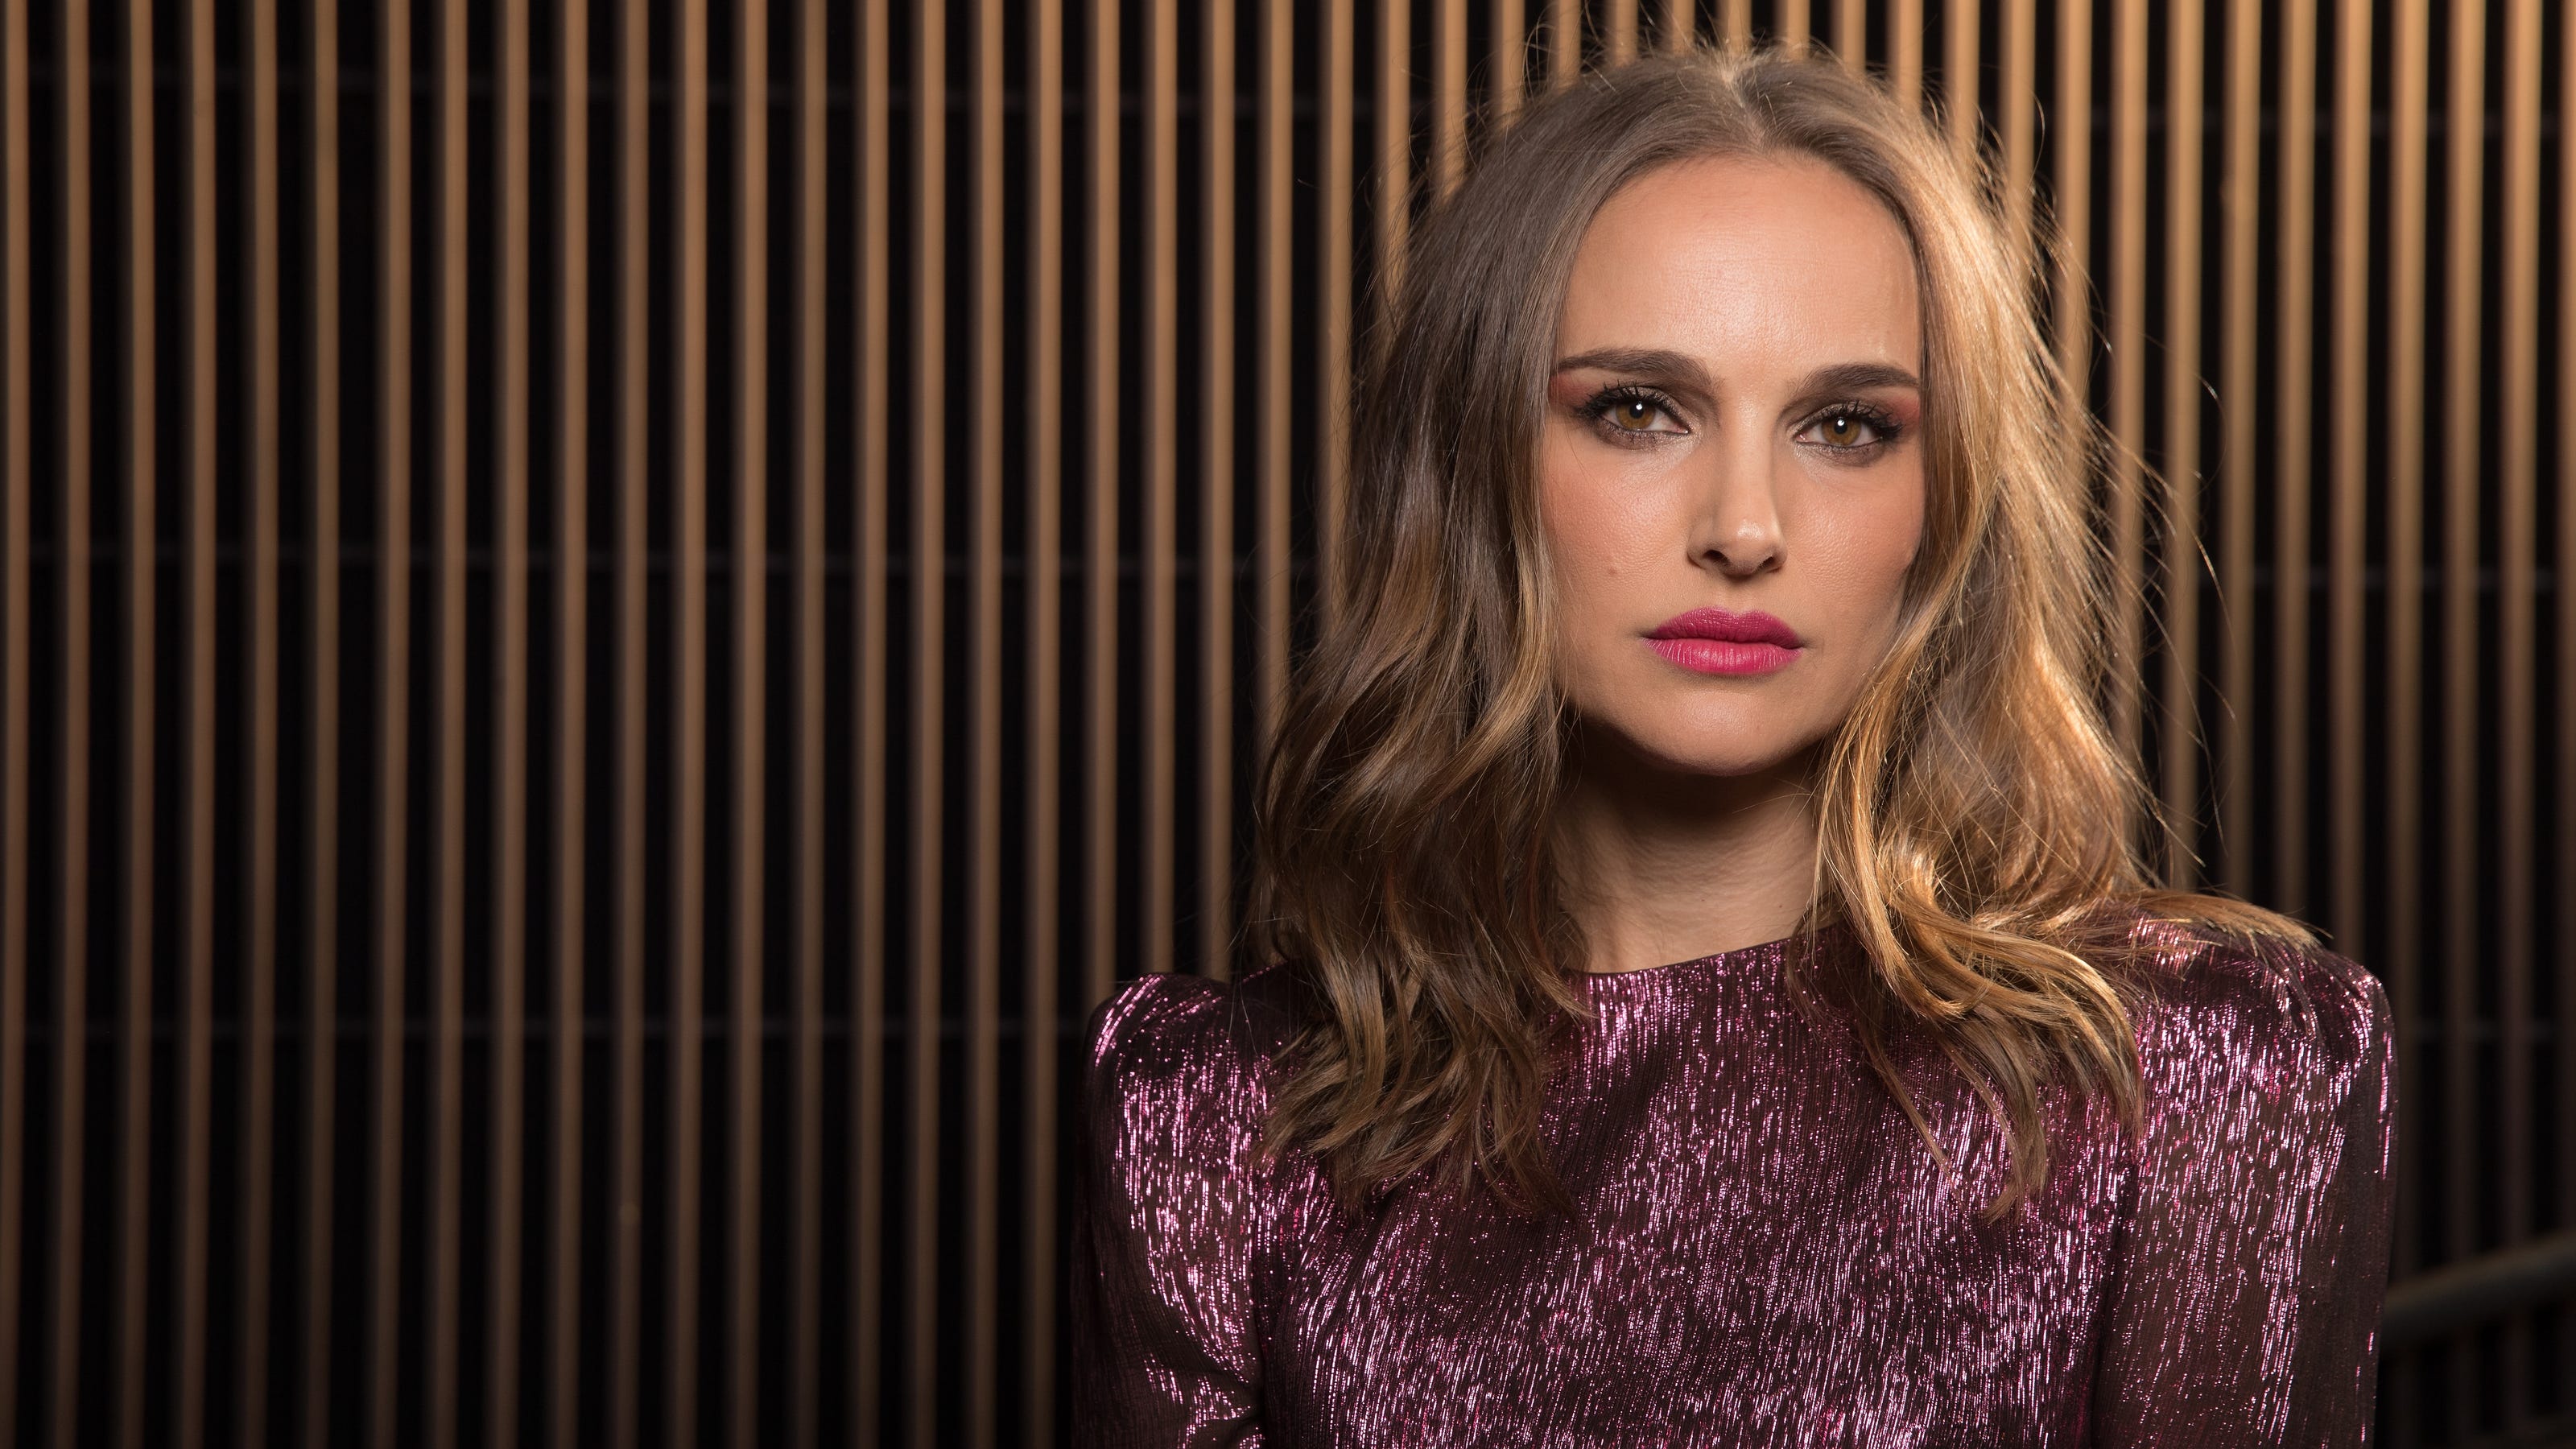 natalie Portman Is Officially A Pop Star Thanks To Vox Lux